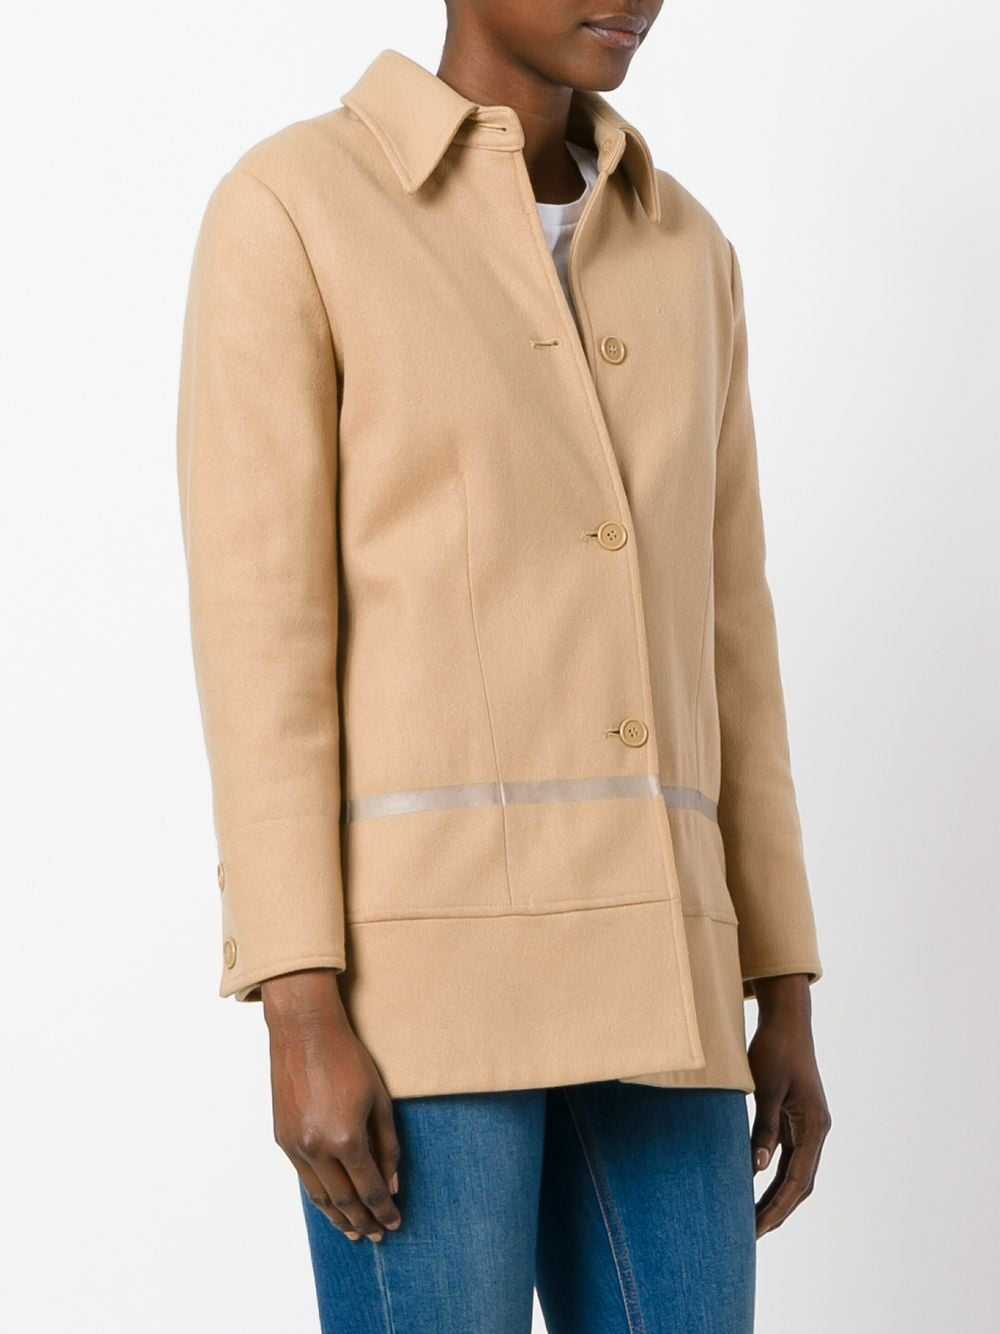 Helmut Lang Pre-Owned single breasted coat - Neut… - image 3